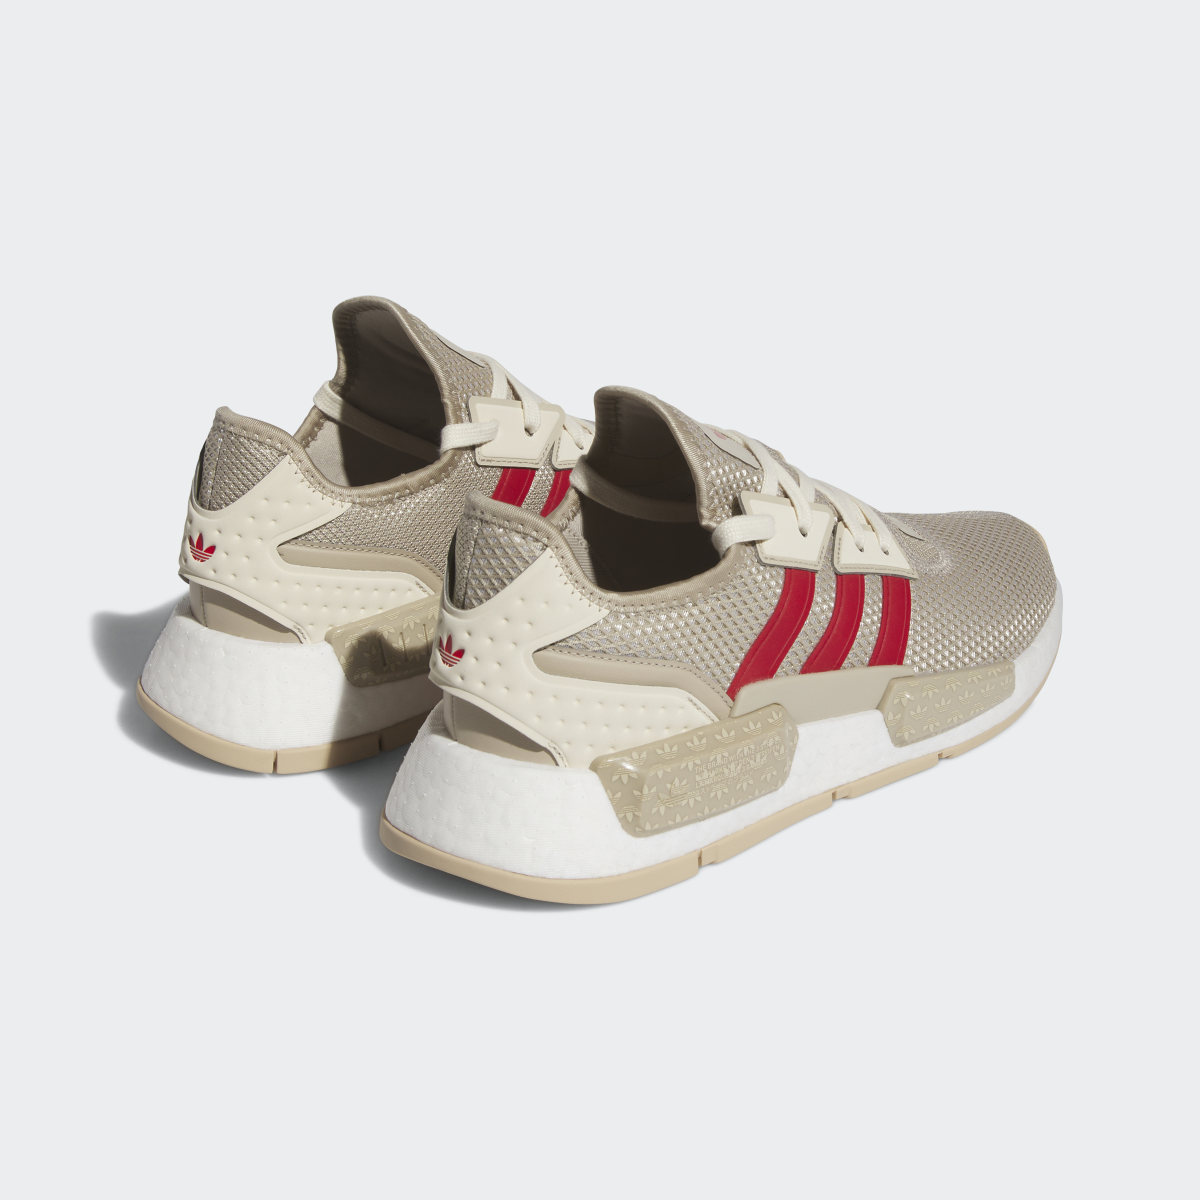 Adidas NMD_G1 Shoes. 8